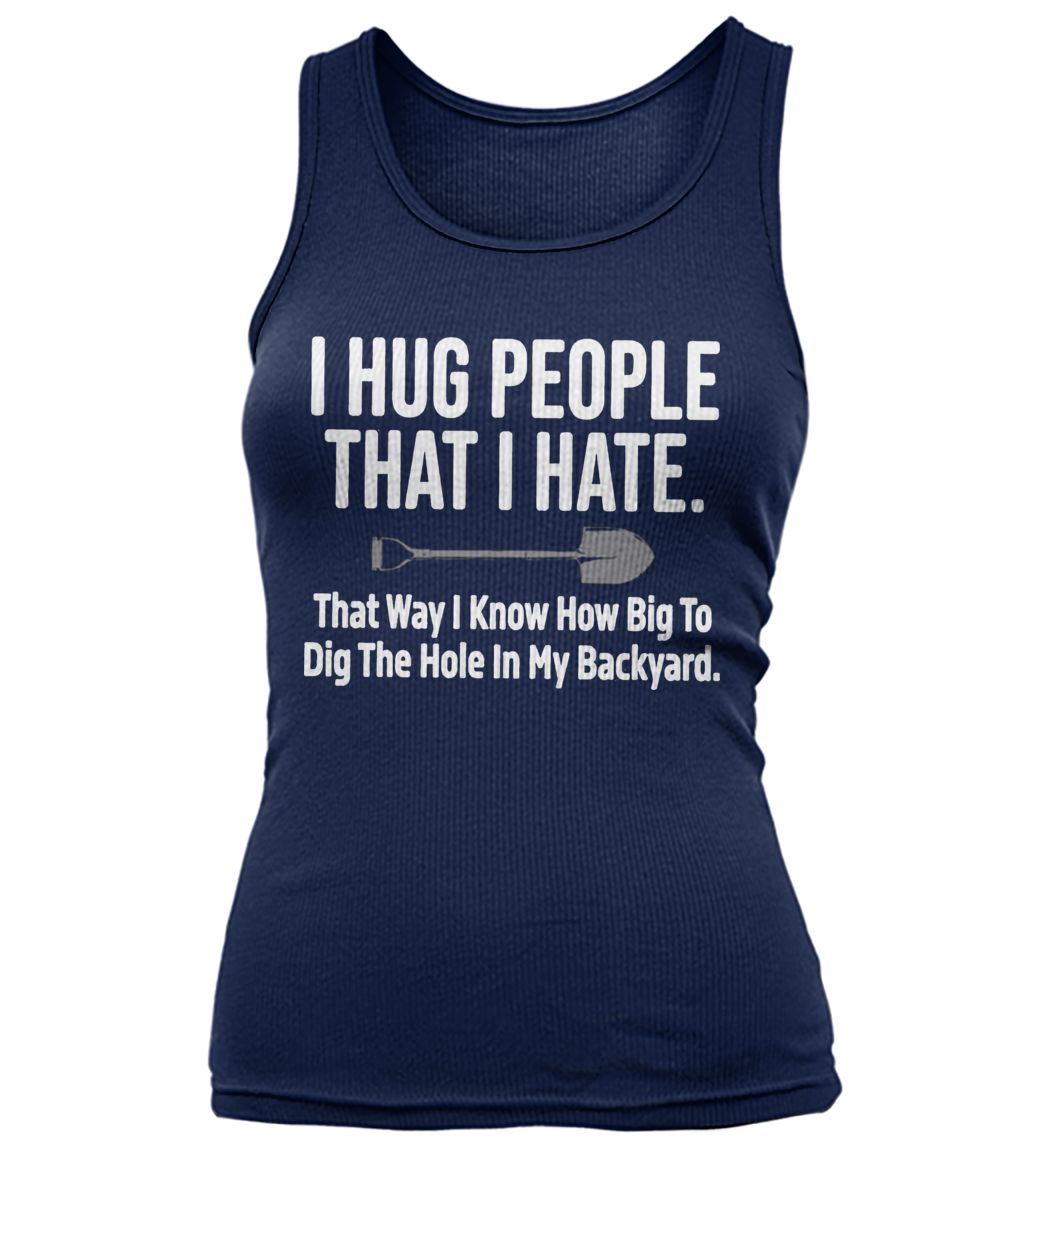 I hug people that I hate that way I know how big to dig the hole in my backyard women's tank top